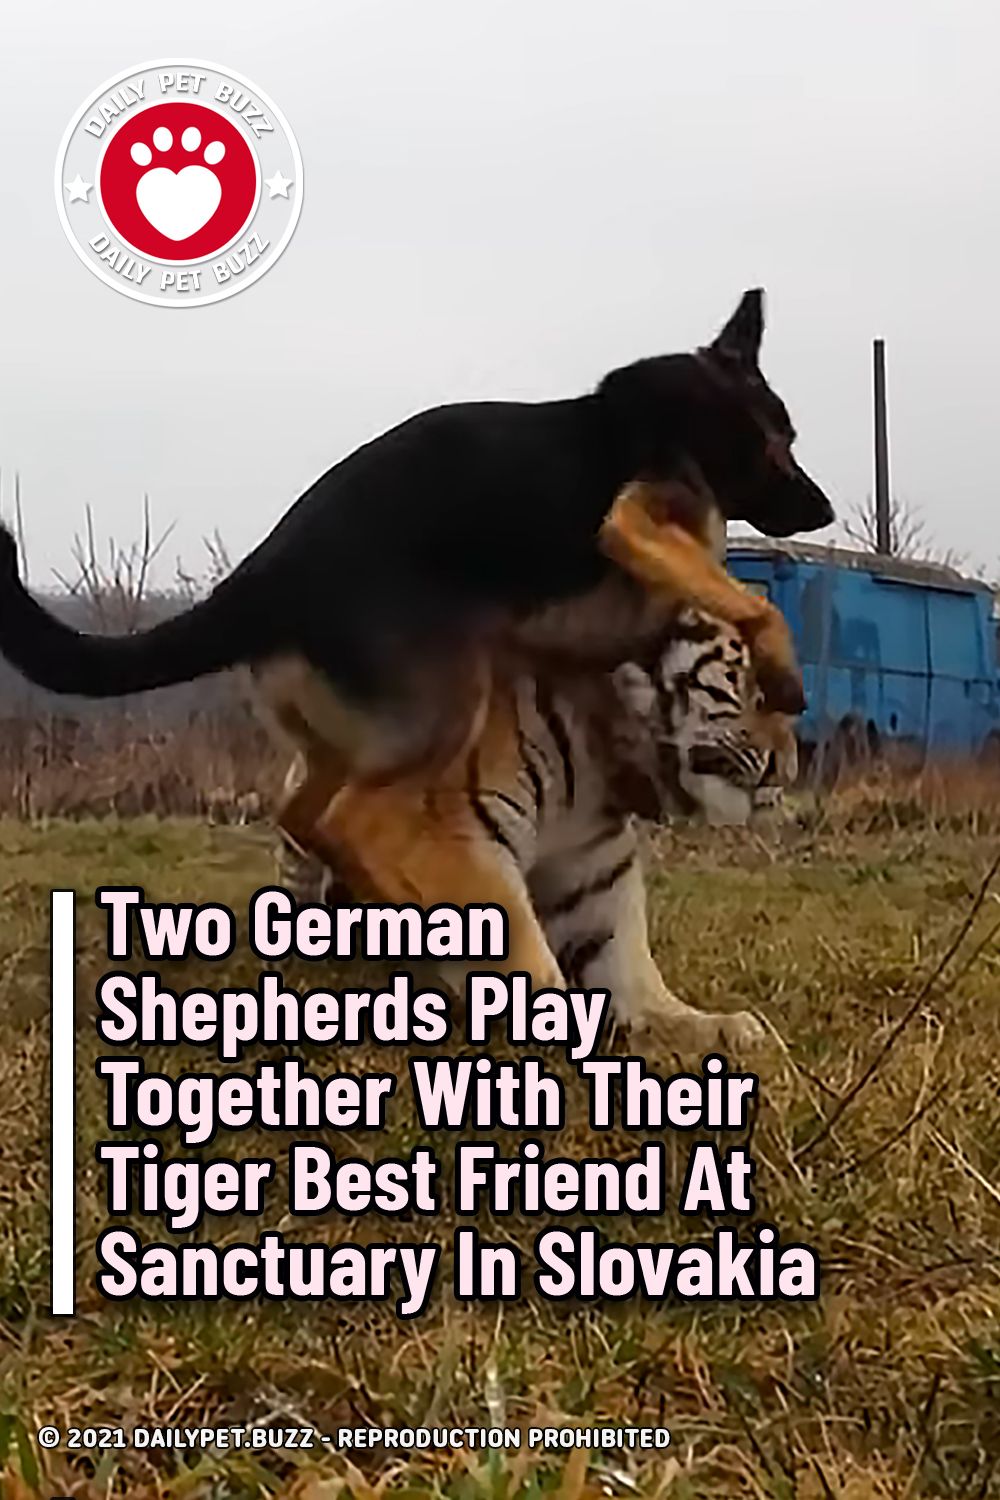 Two German Shepherds Play Together With Their Tiger Best Friend At Sanctuary In Slovakia